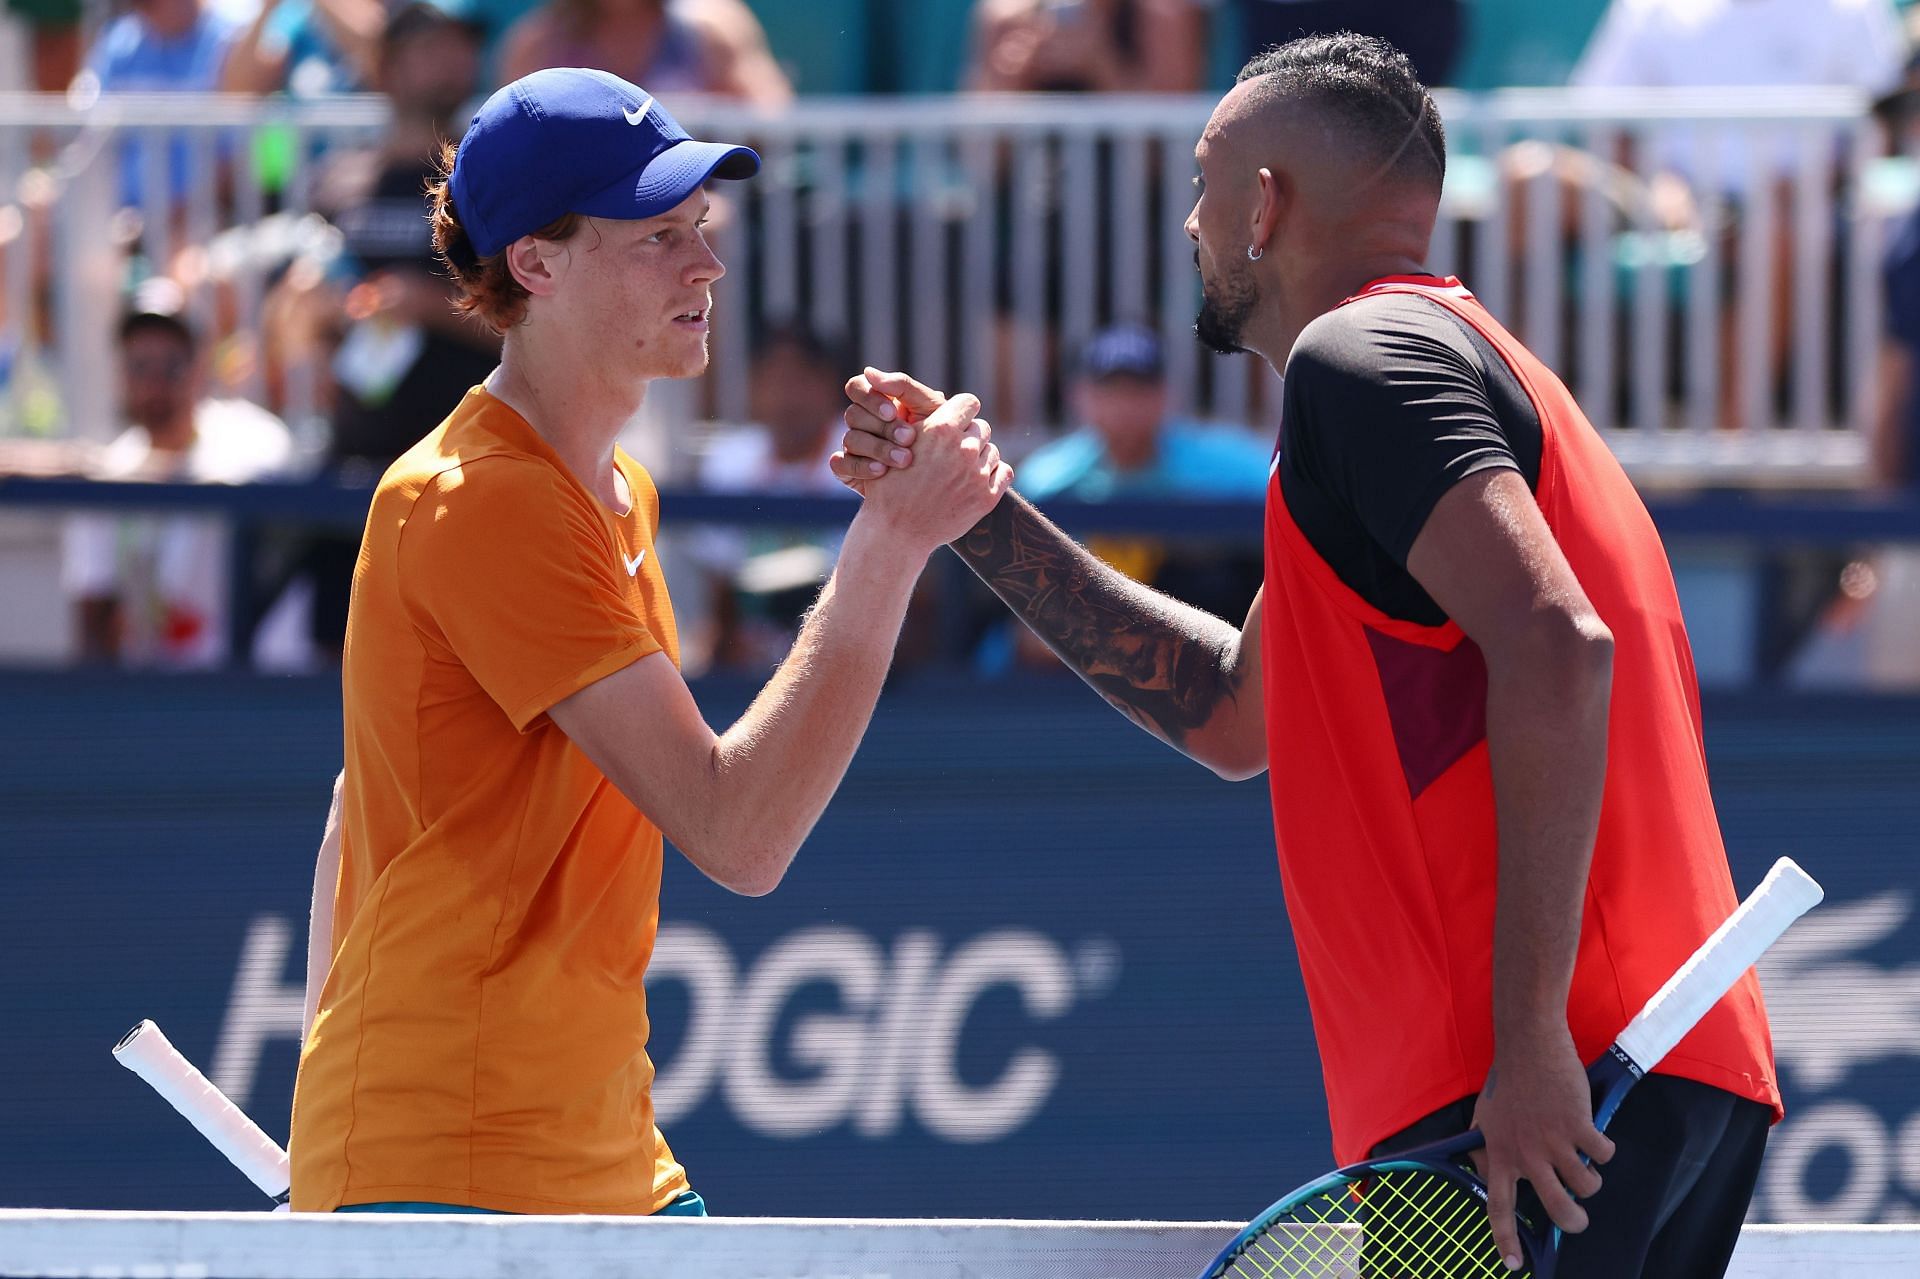 Nick Kyrgios and Jannik Sinner interact after a match in 2022